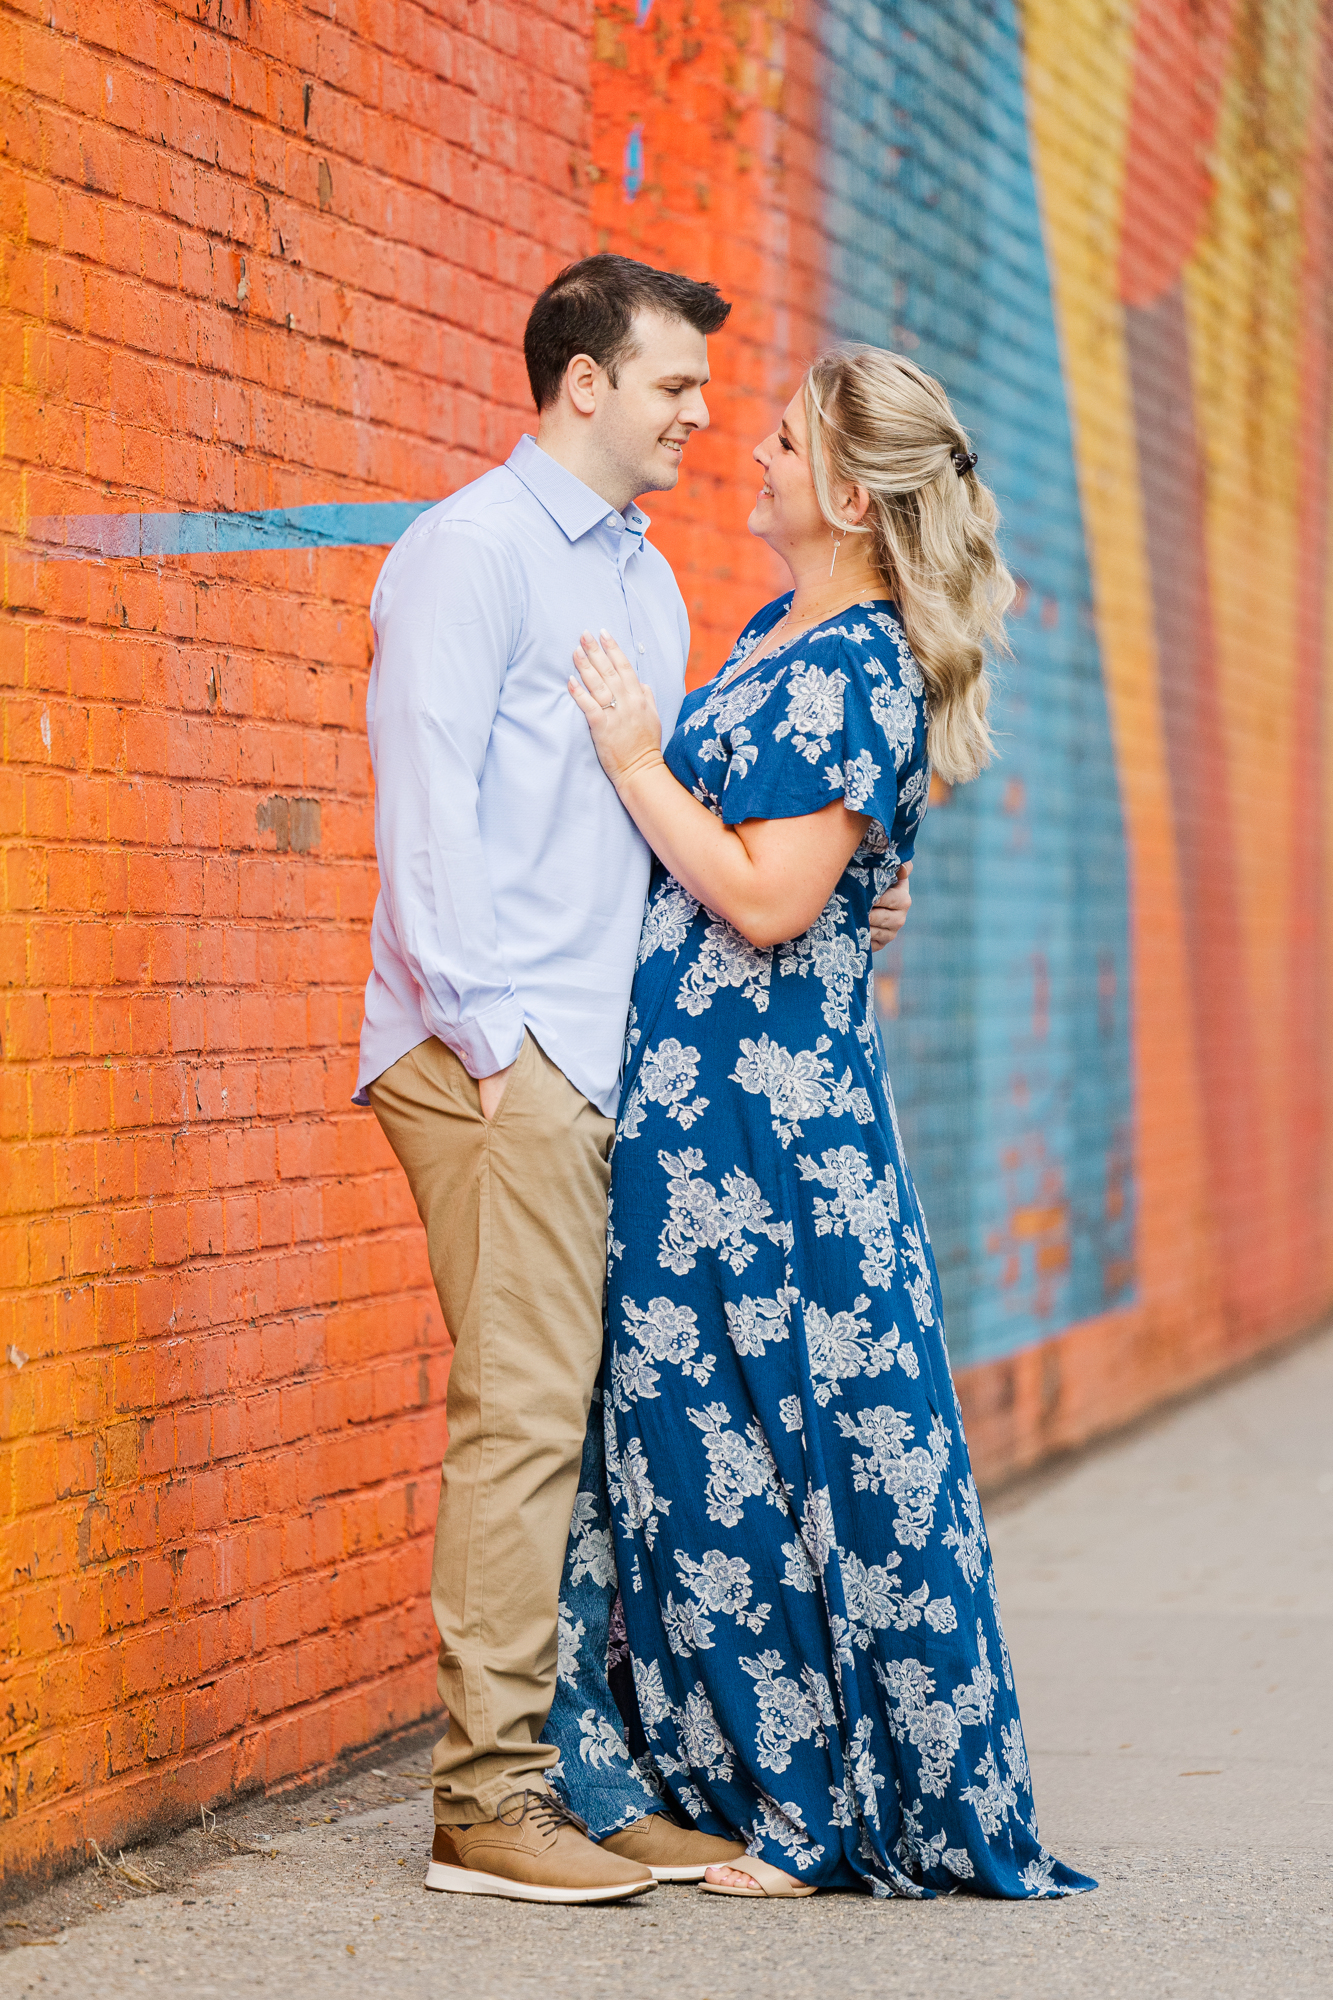 Joyous Engagement Pictures in DUMBO